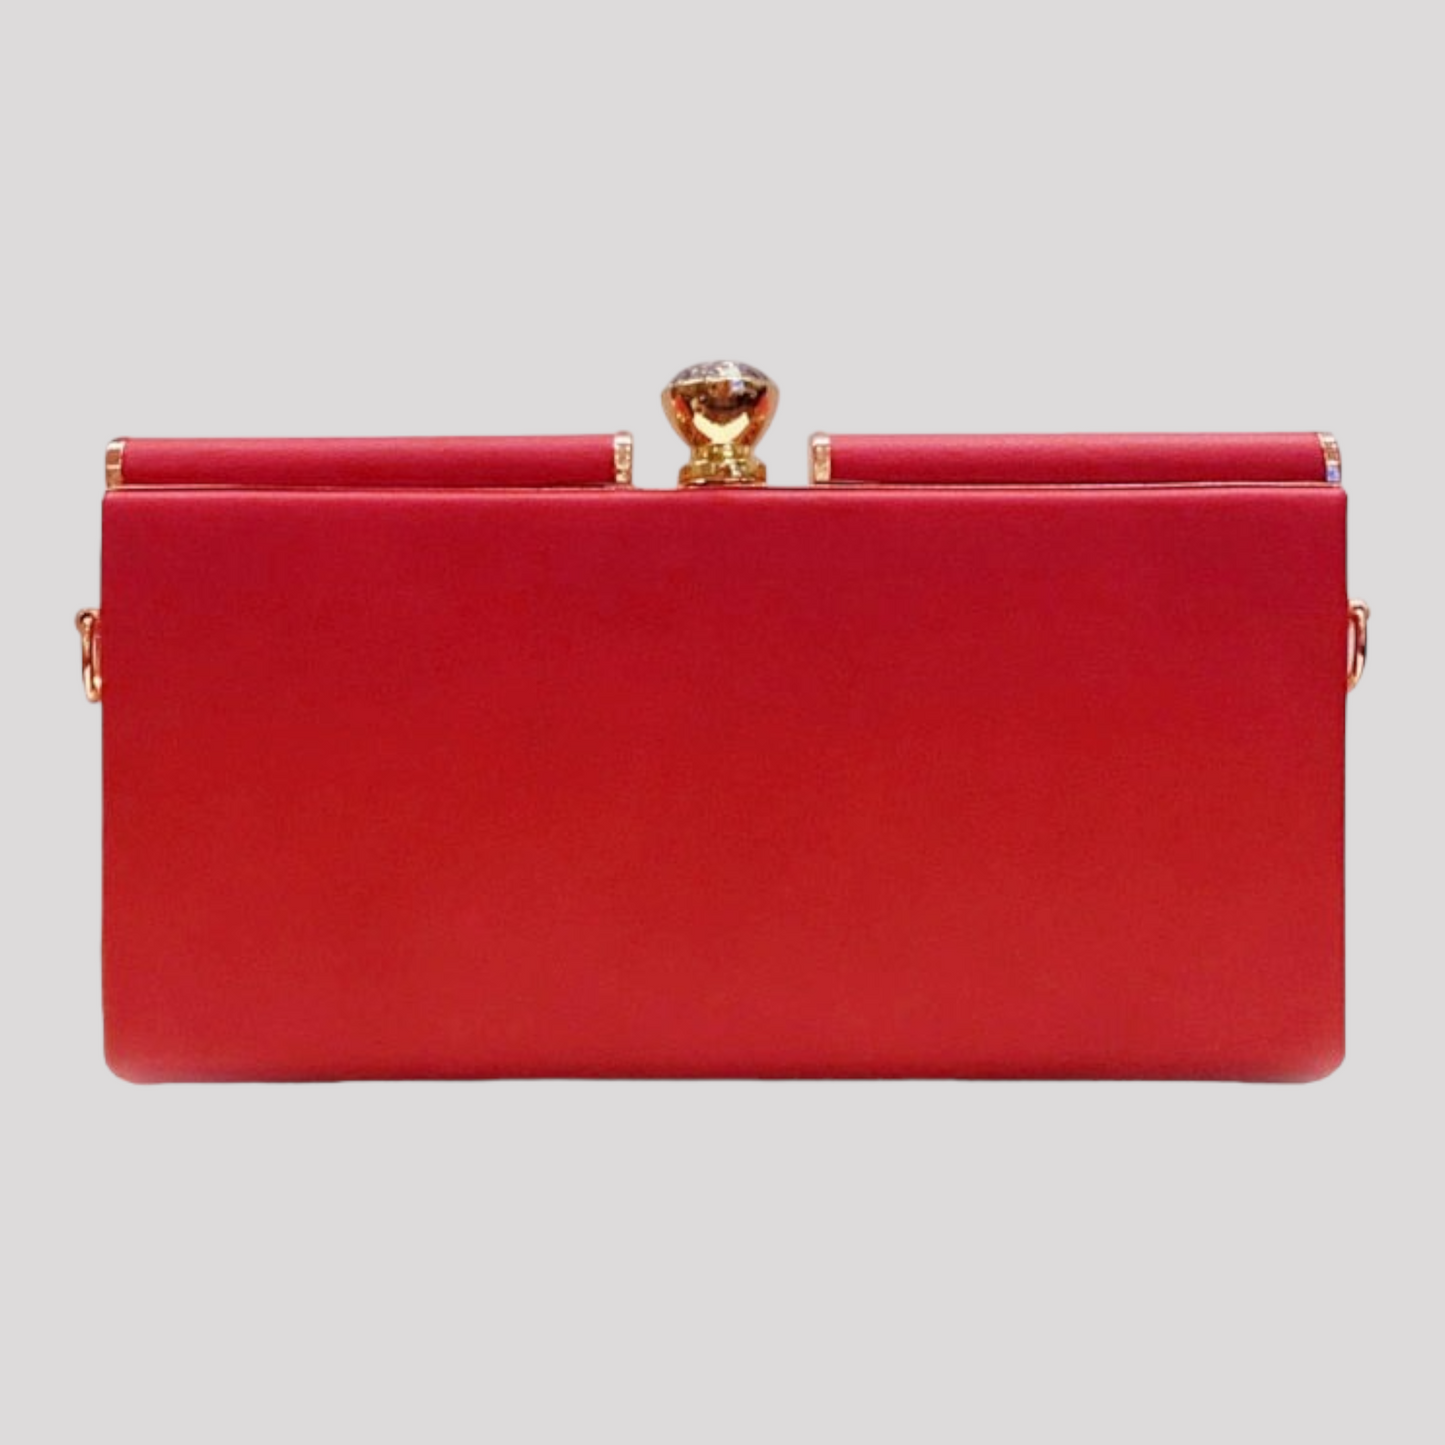 Large Crystal Closure Clutch Bag with Chain Shoulder Strap, Available in 3 Colours